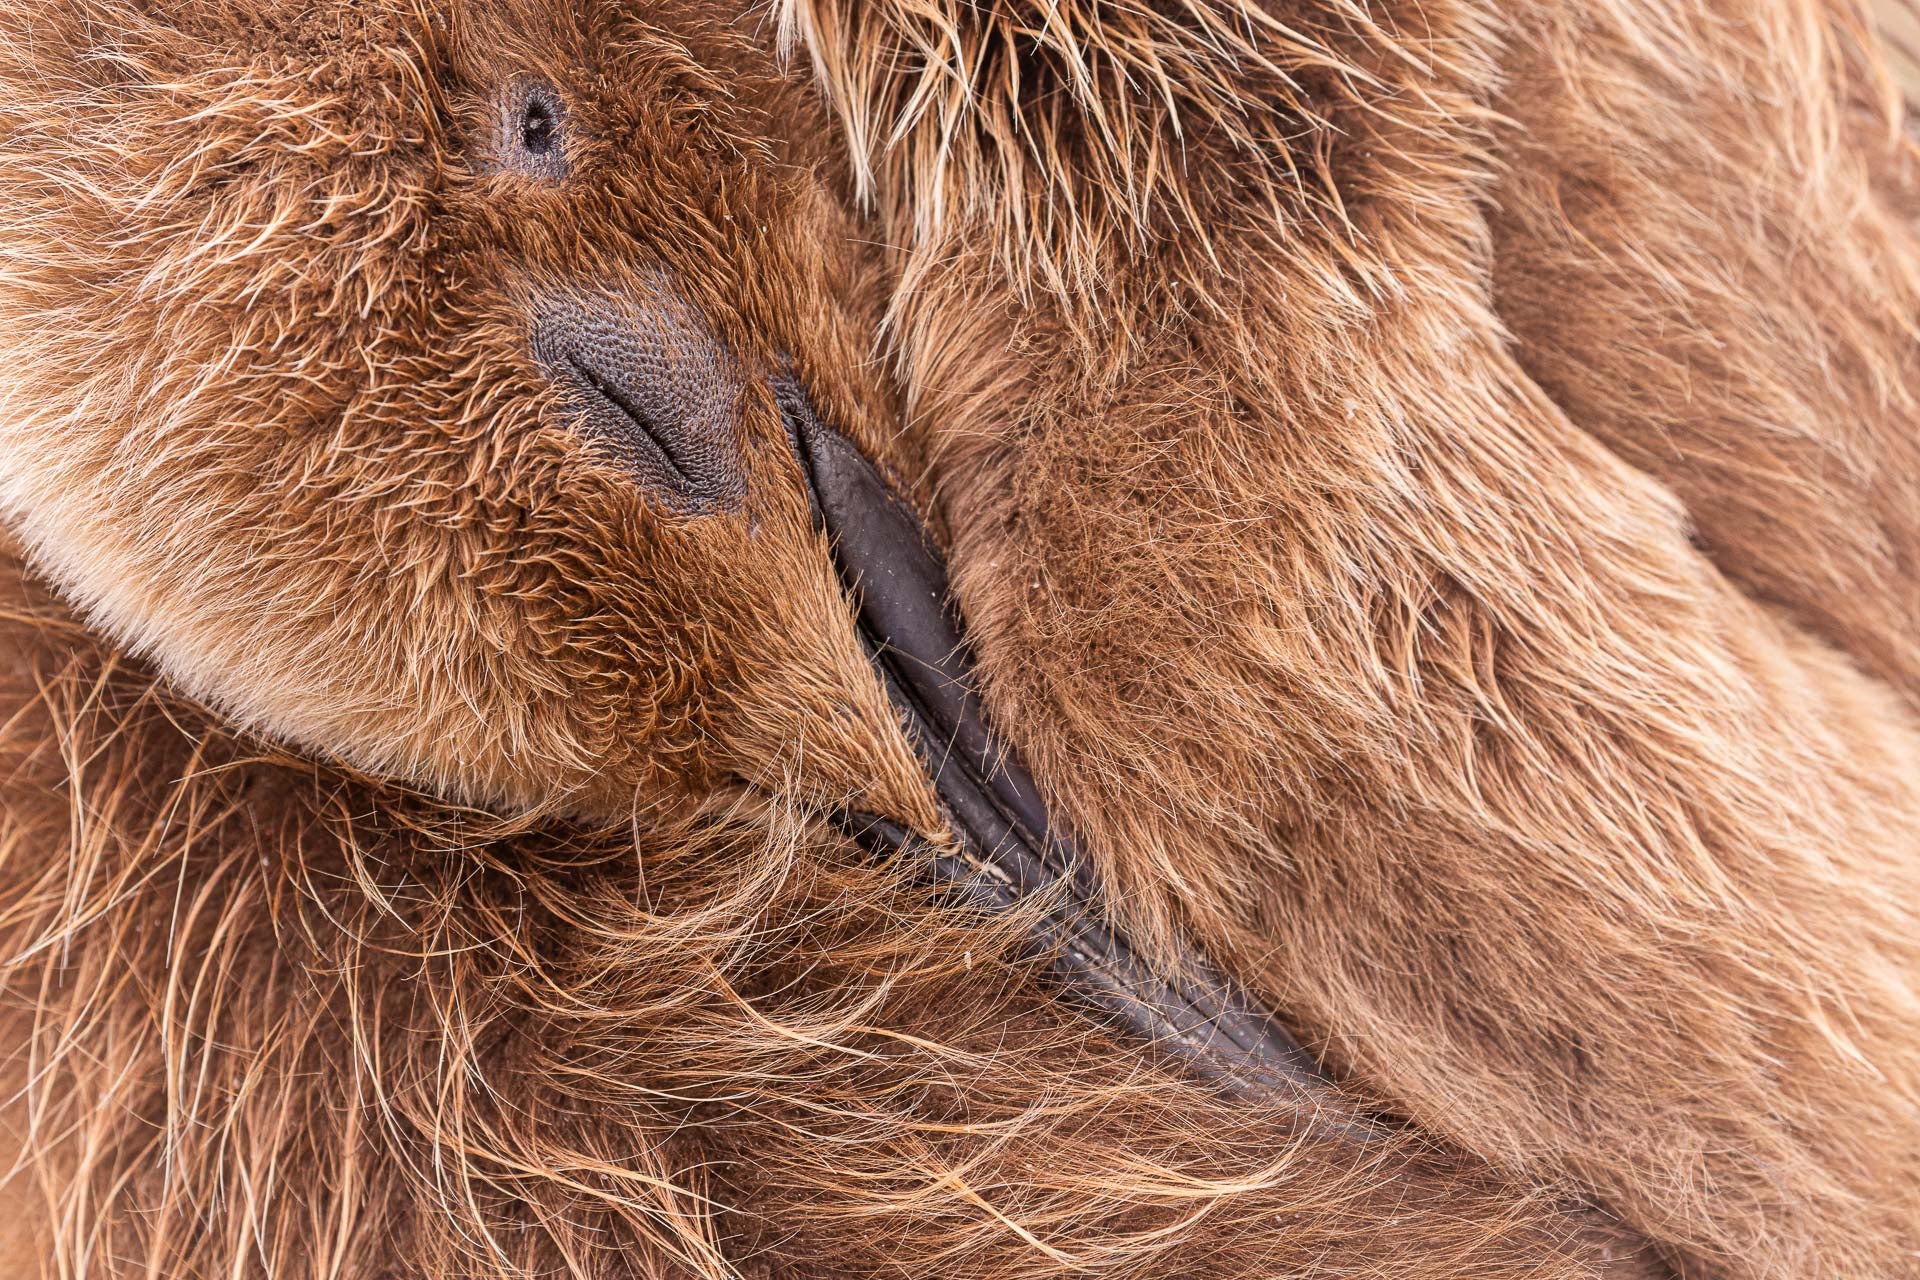 A sleeping king penguin chick in the Falkland Islands. (Photo: Andy Pollard)